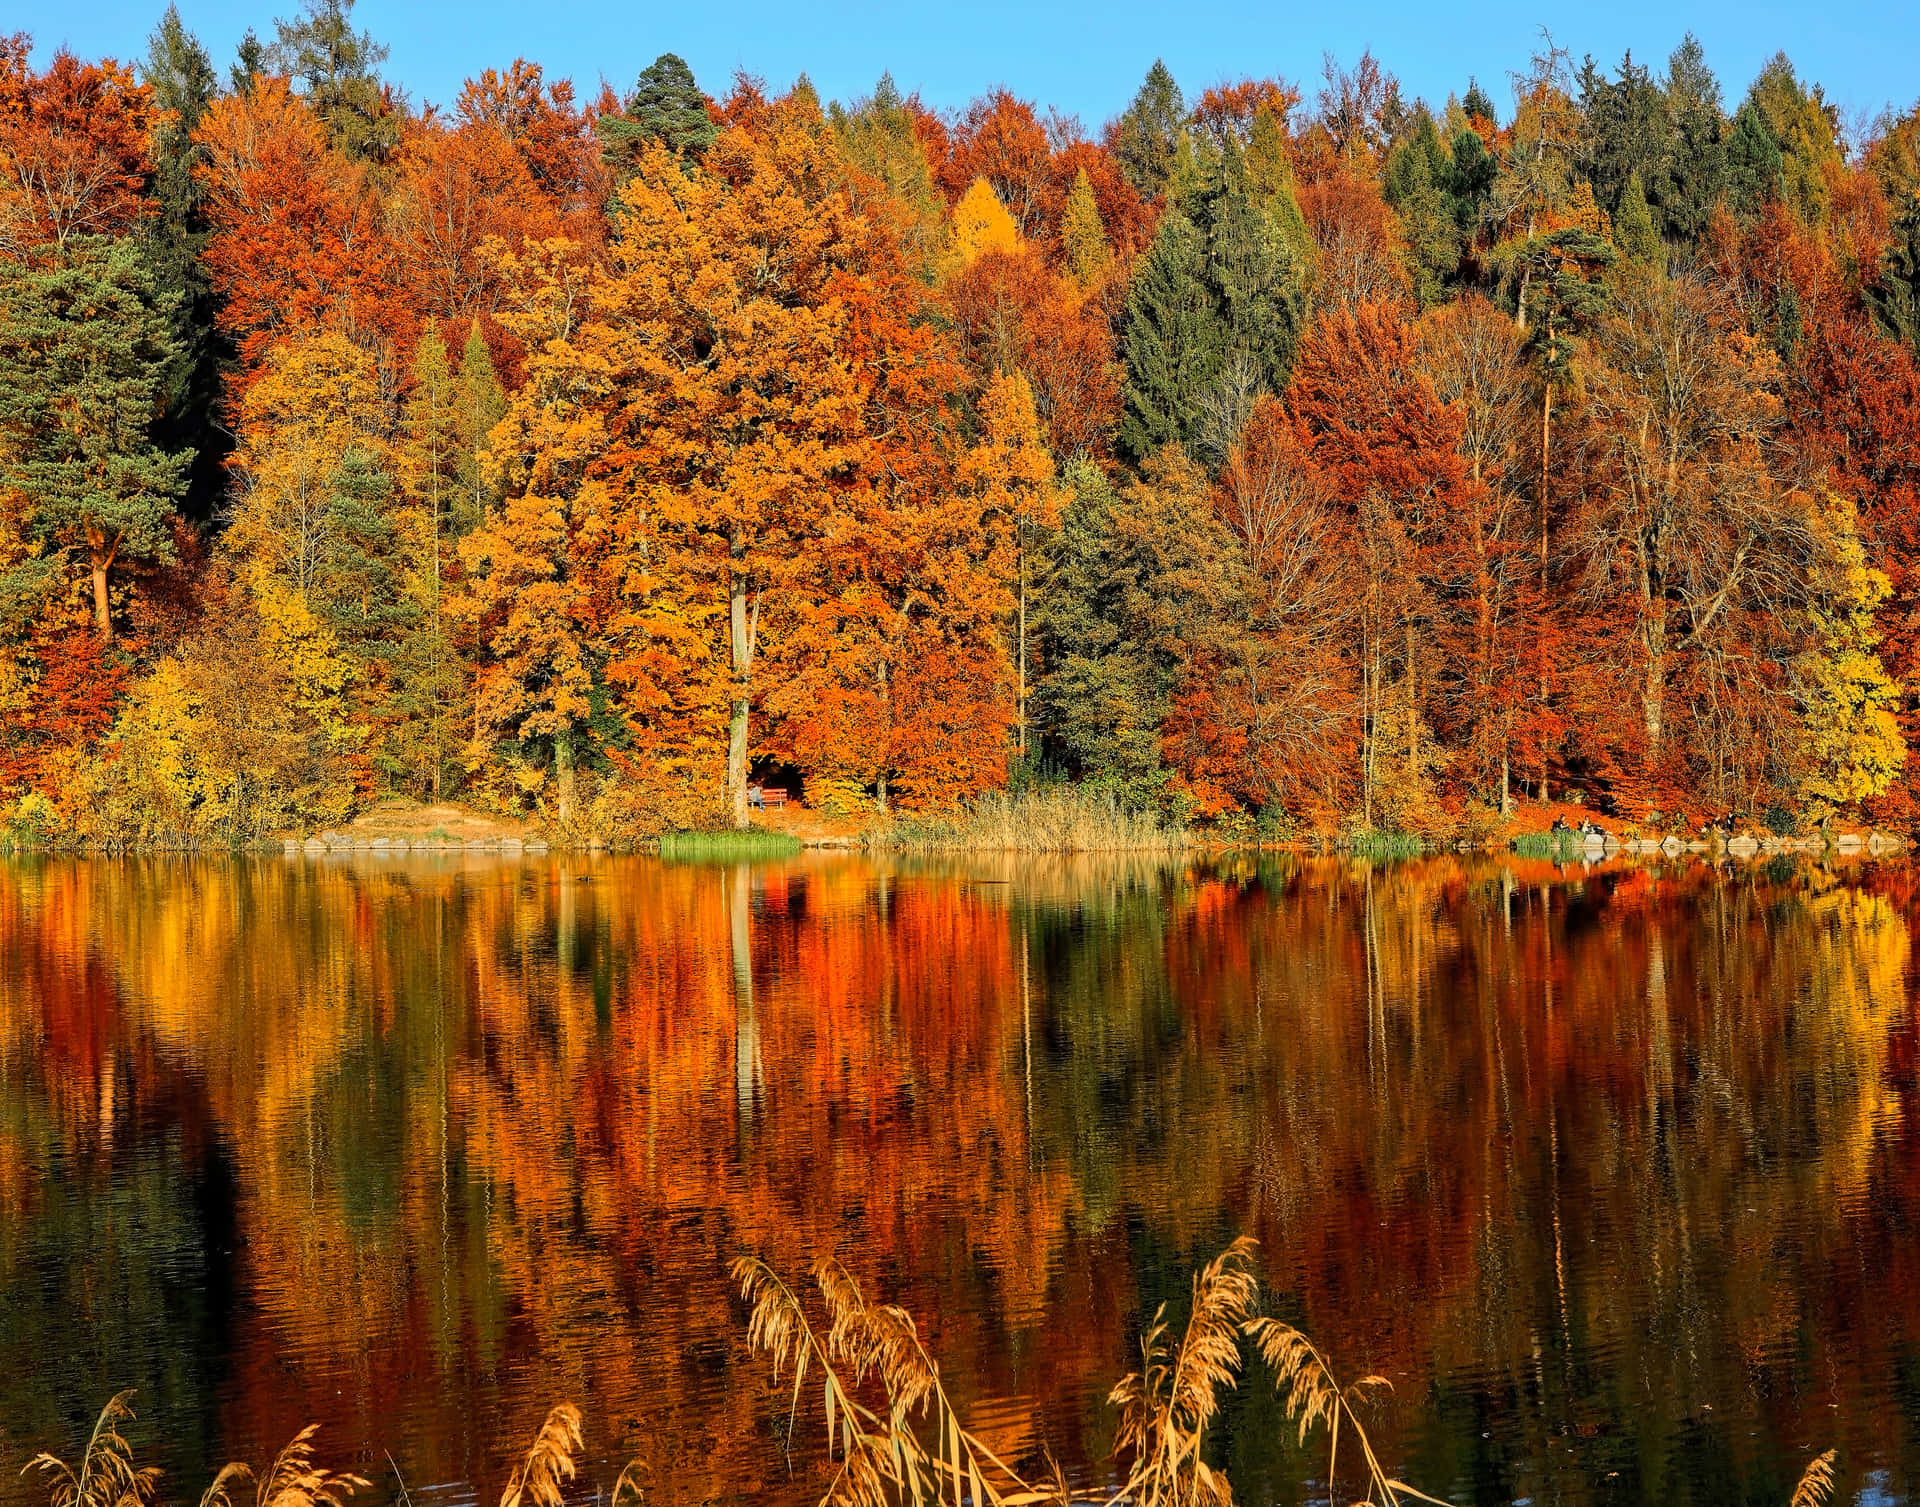 Take in the beauty of fresh autumn leaves Wallpaper